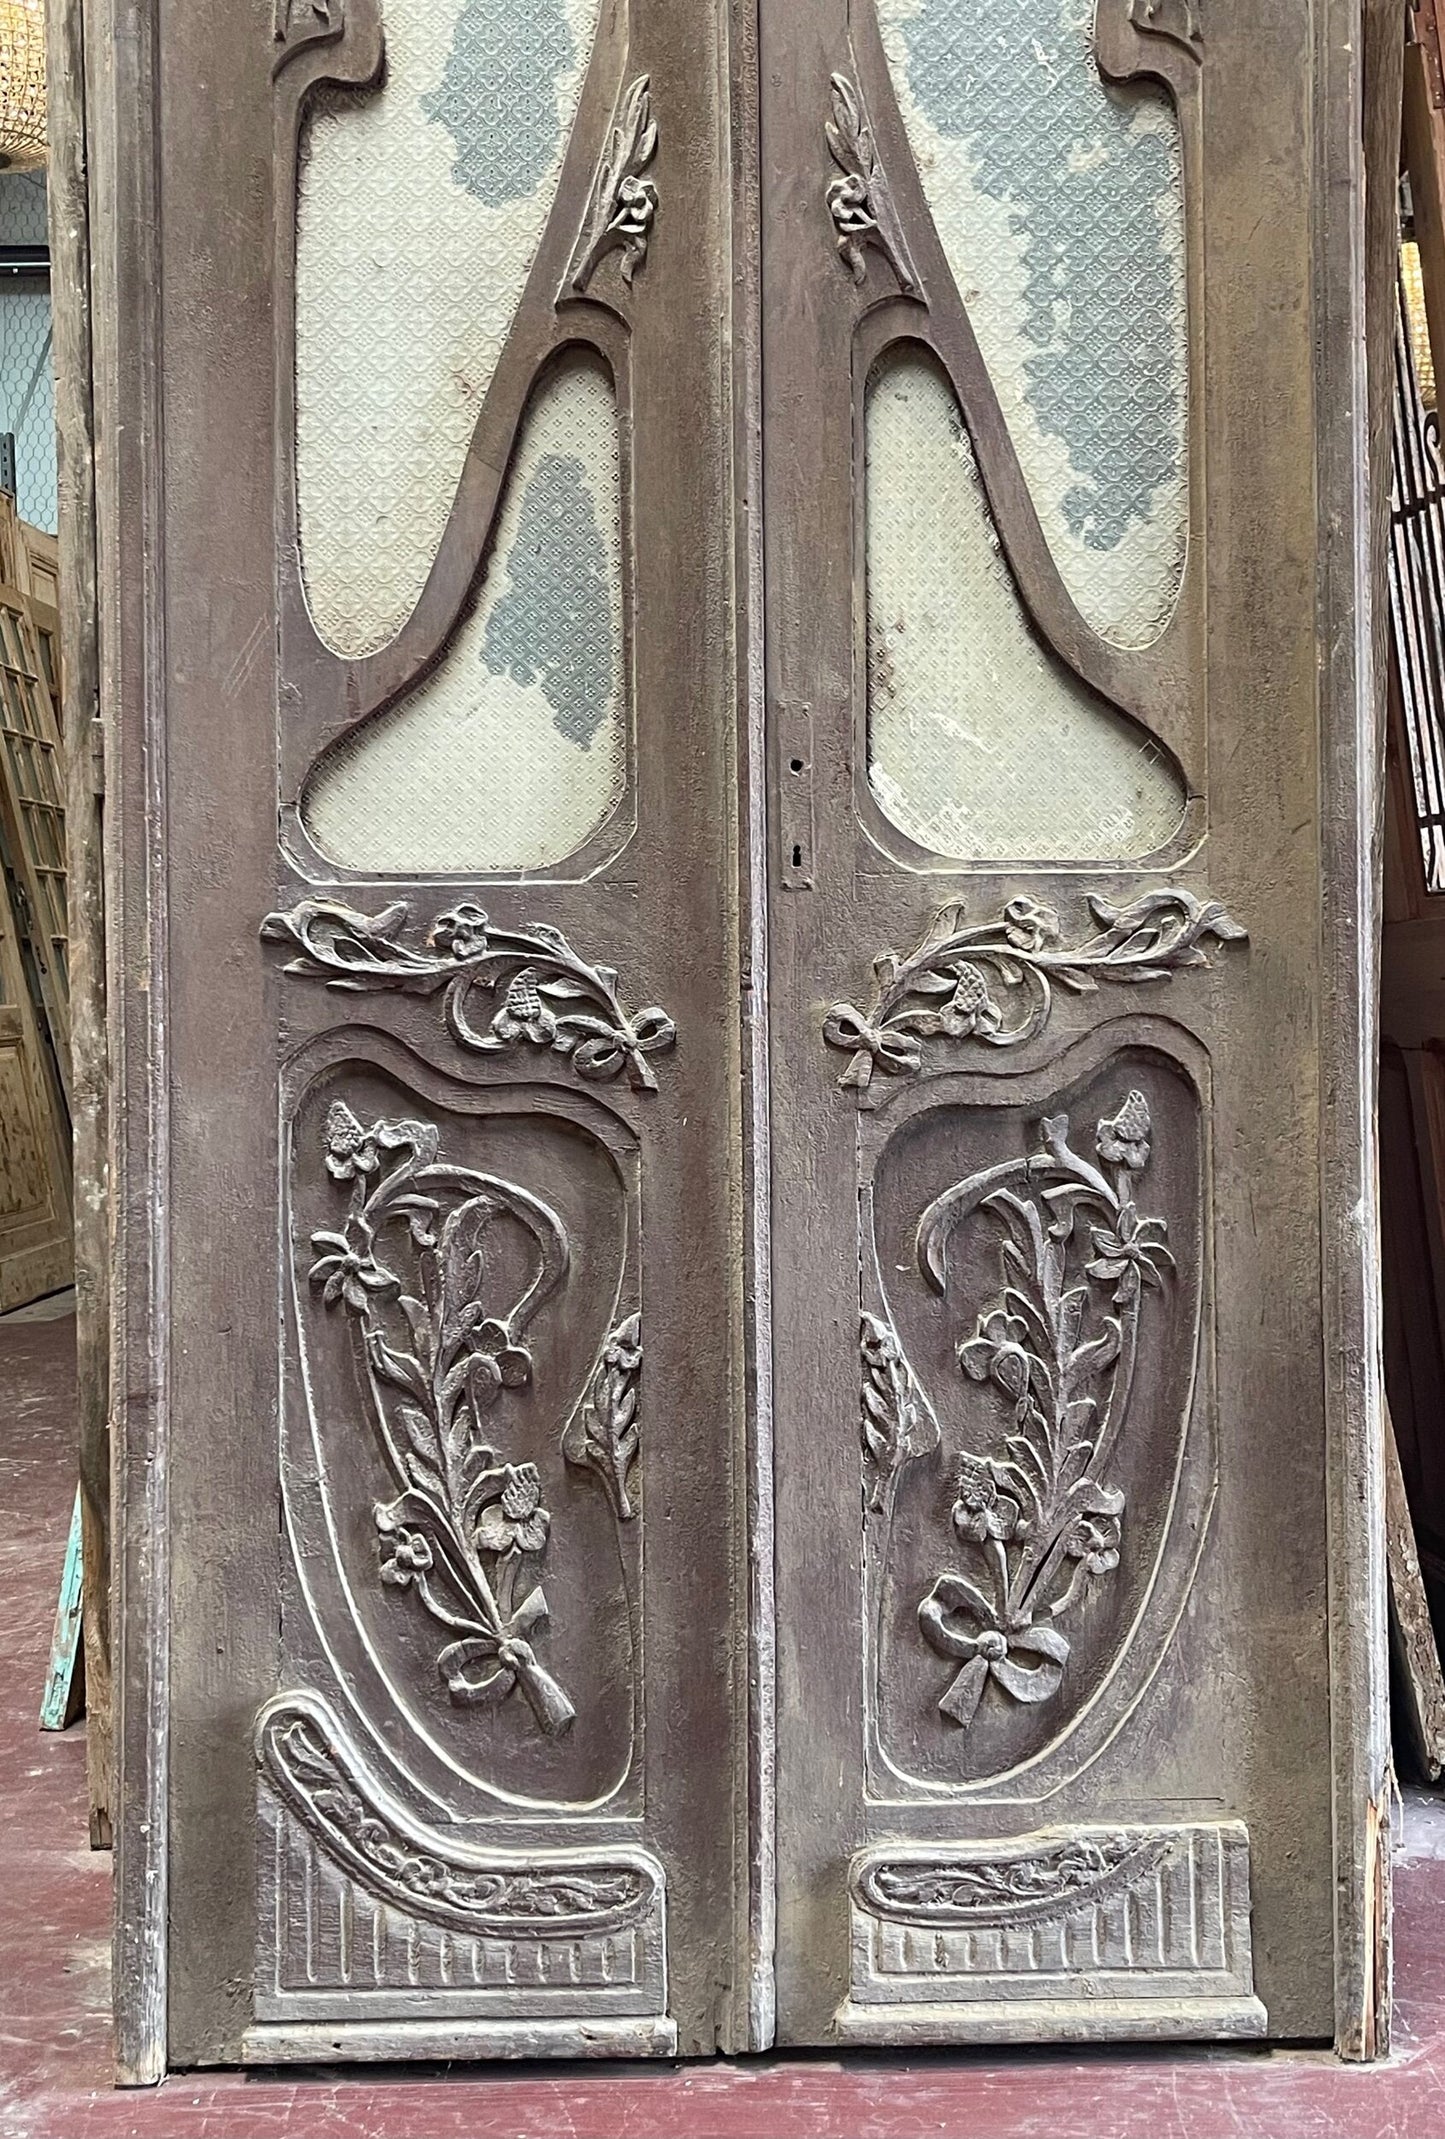 Antique Farouk Palace  doors with glass (F 130.5x46.5) (D 103.5x42.75) I256